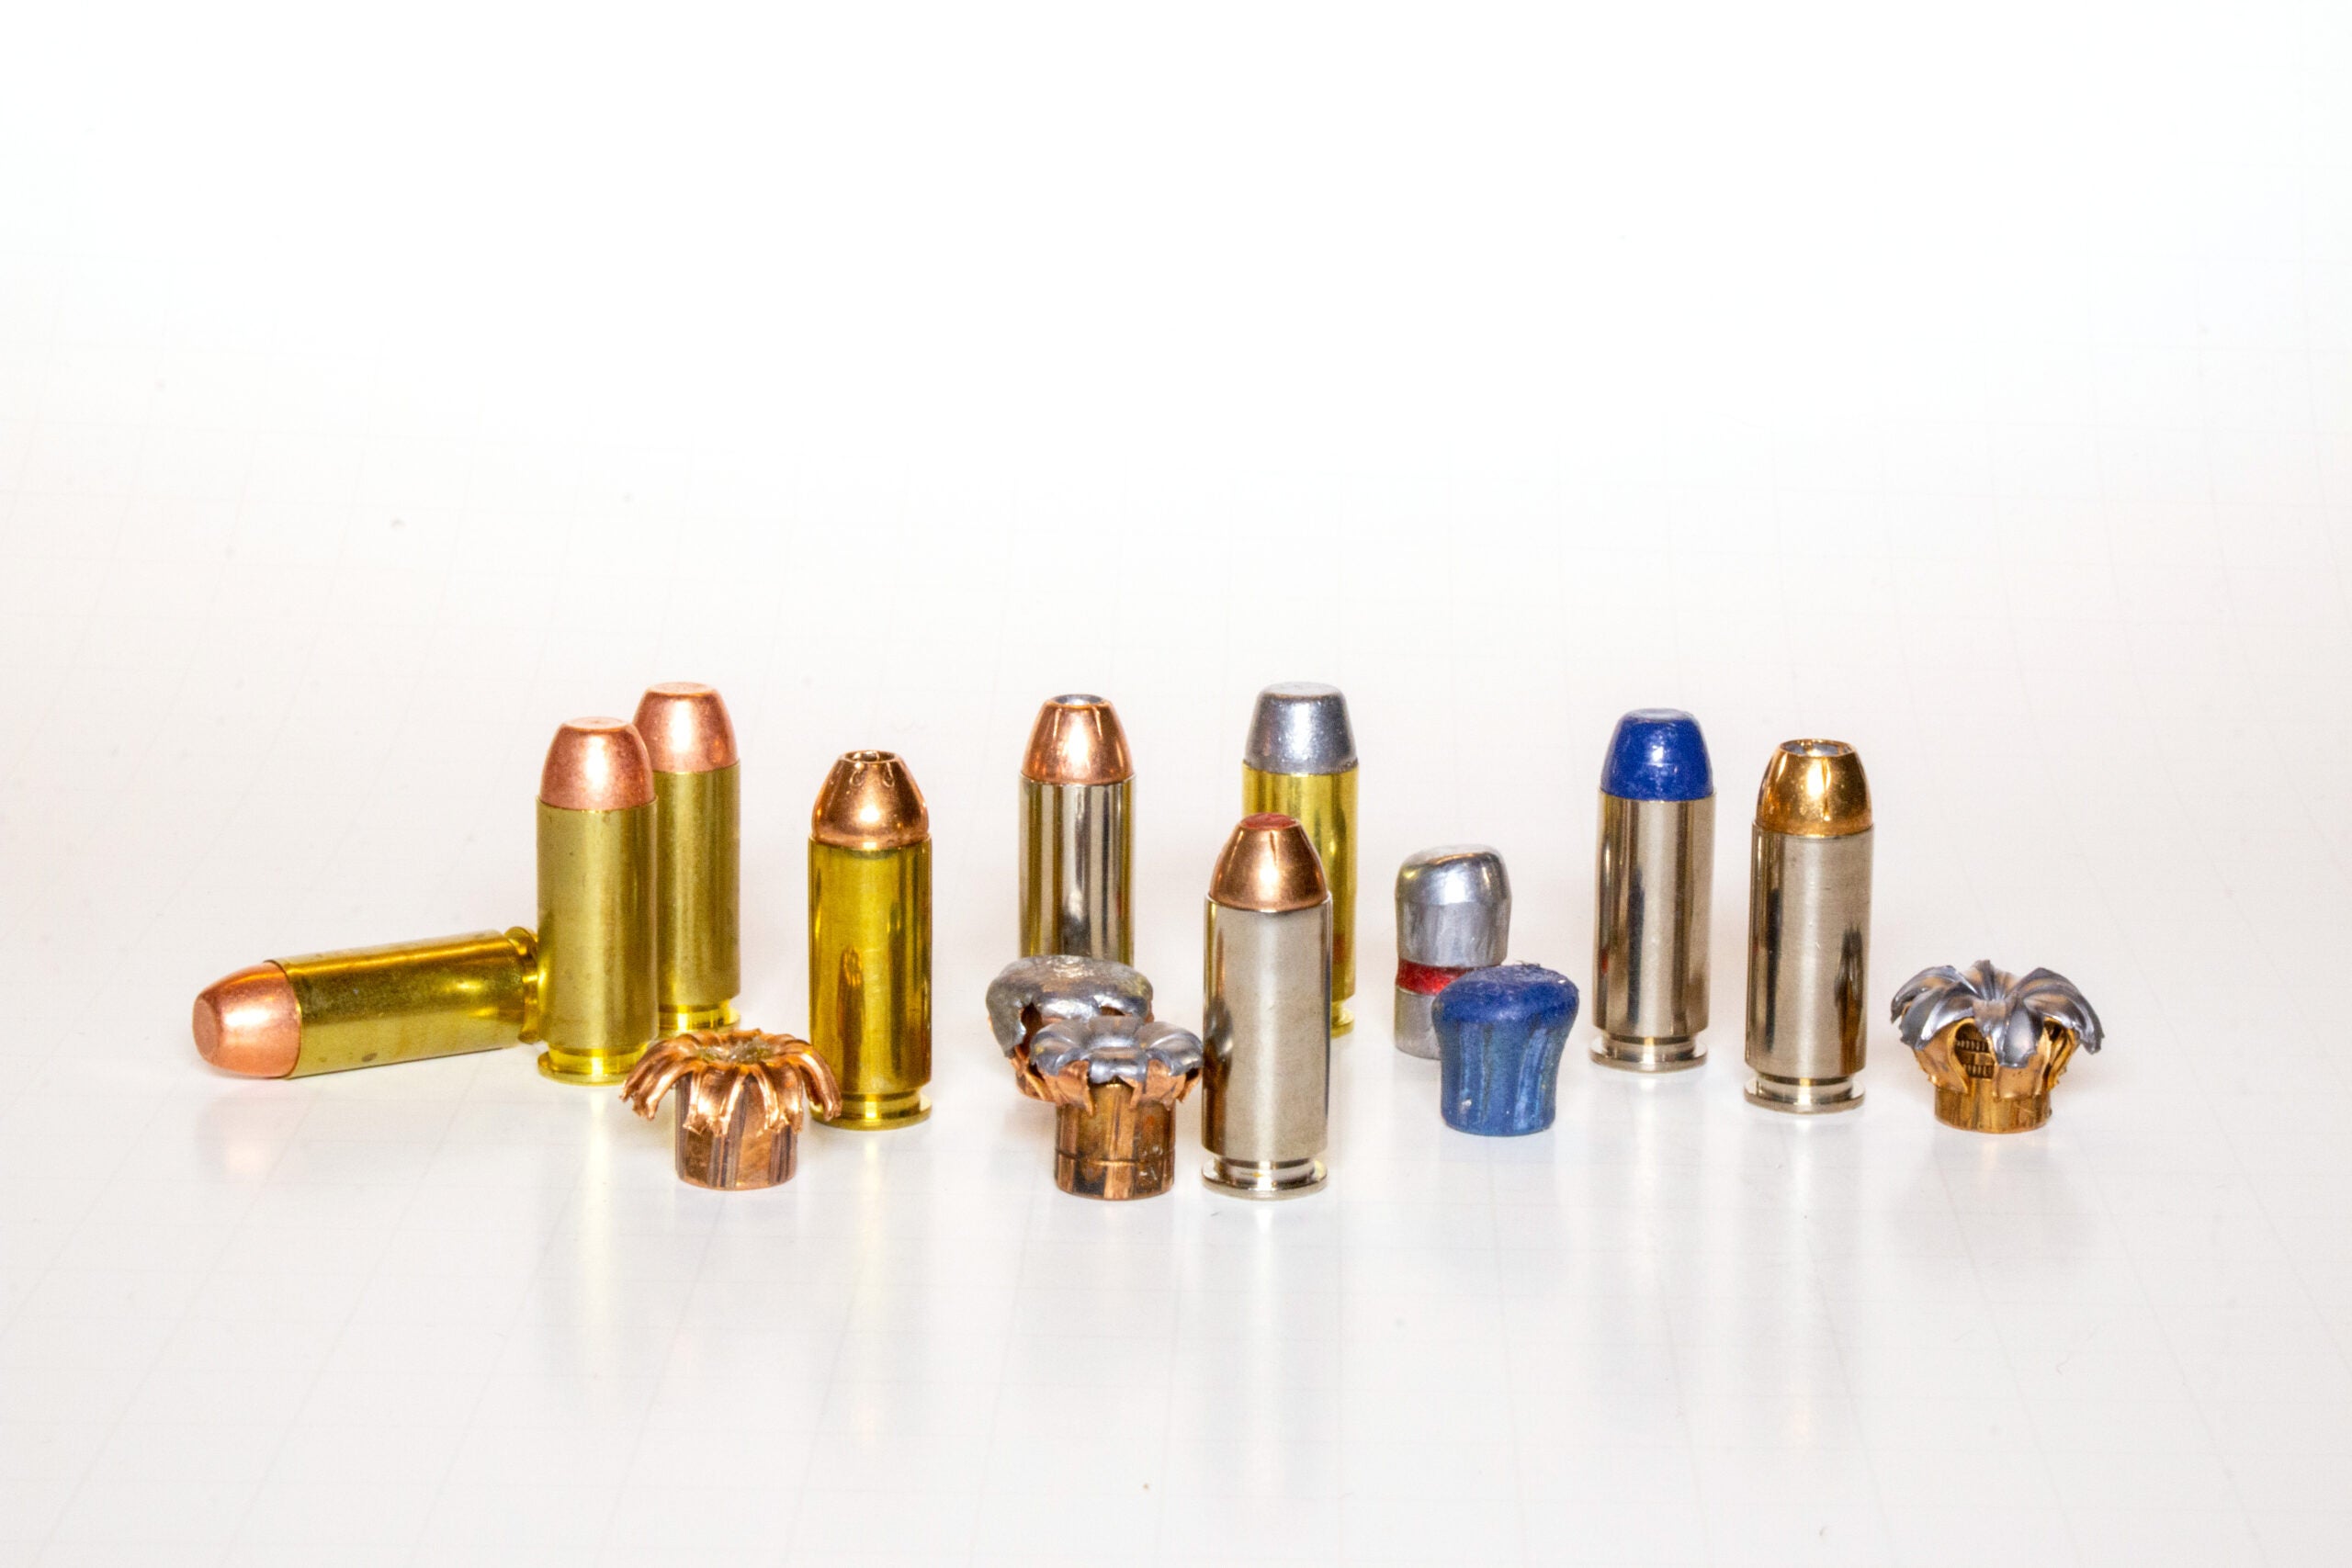 The testing lineup for the best 10mm ammo.